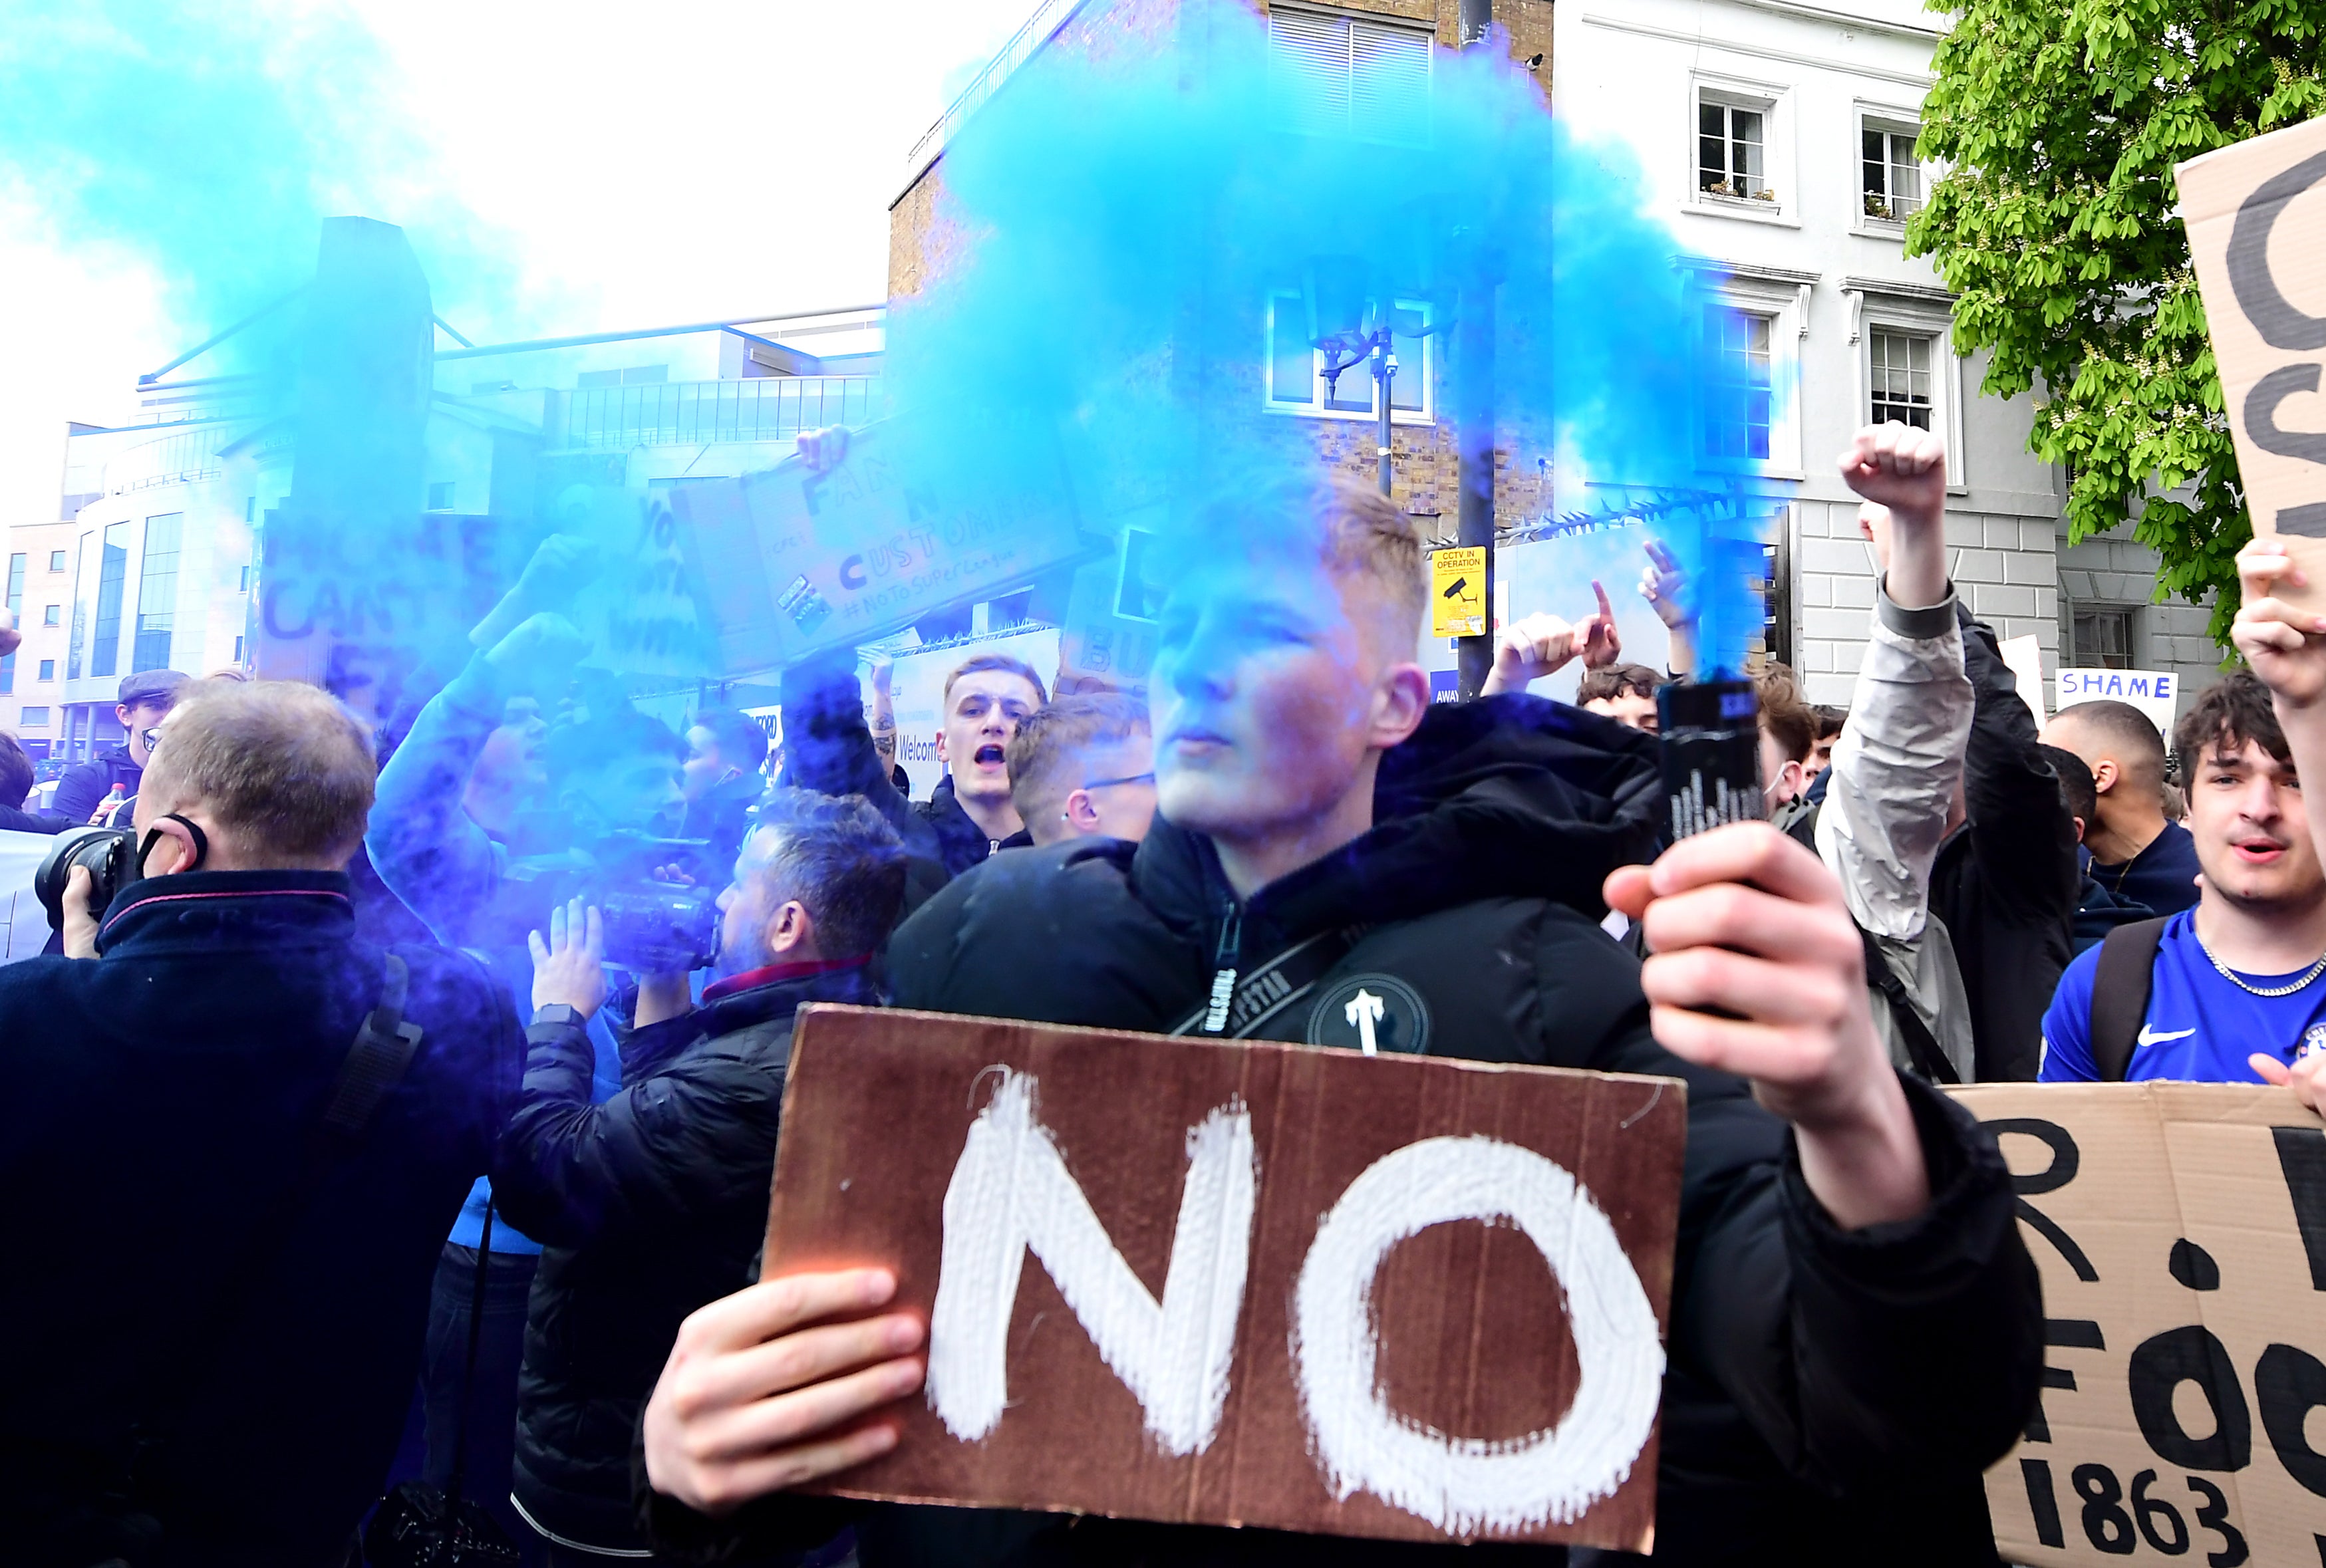 Plans for a new European Super League sparked widespread opposition, including protests from Chelsea fans